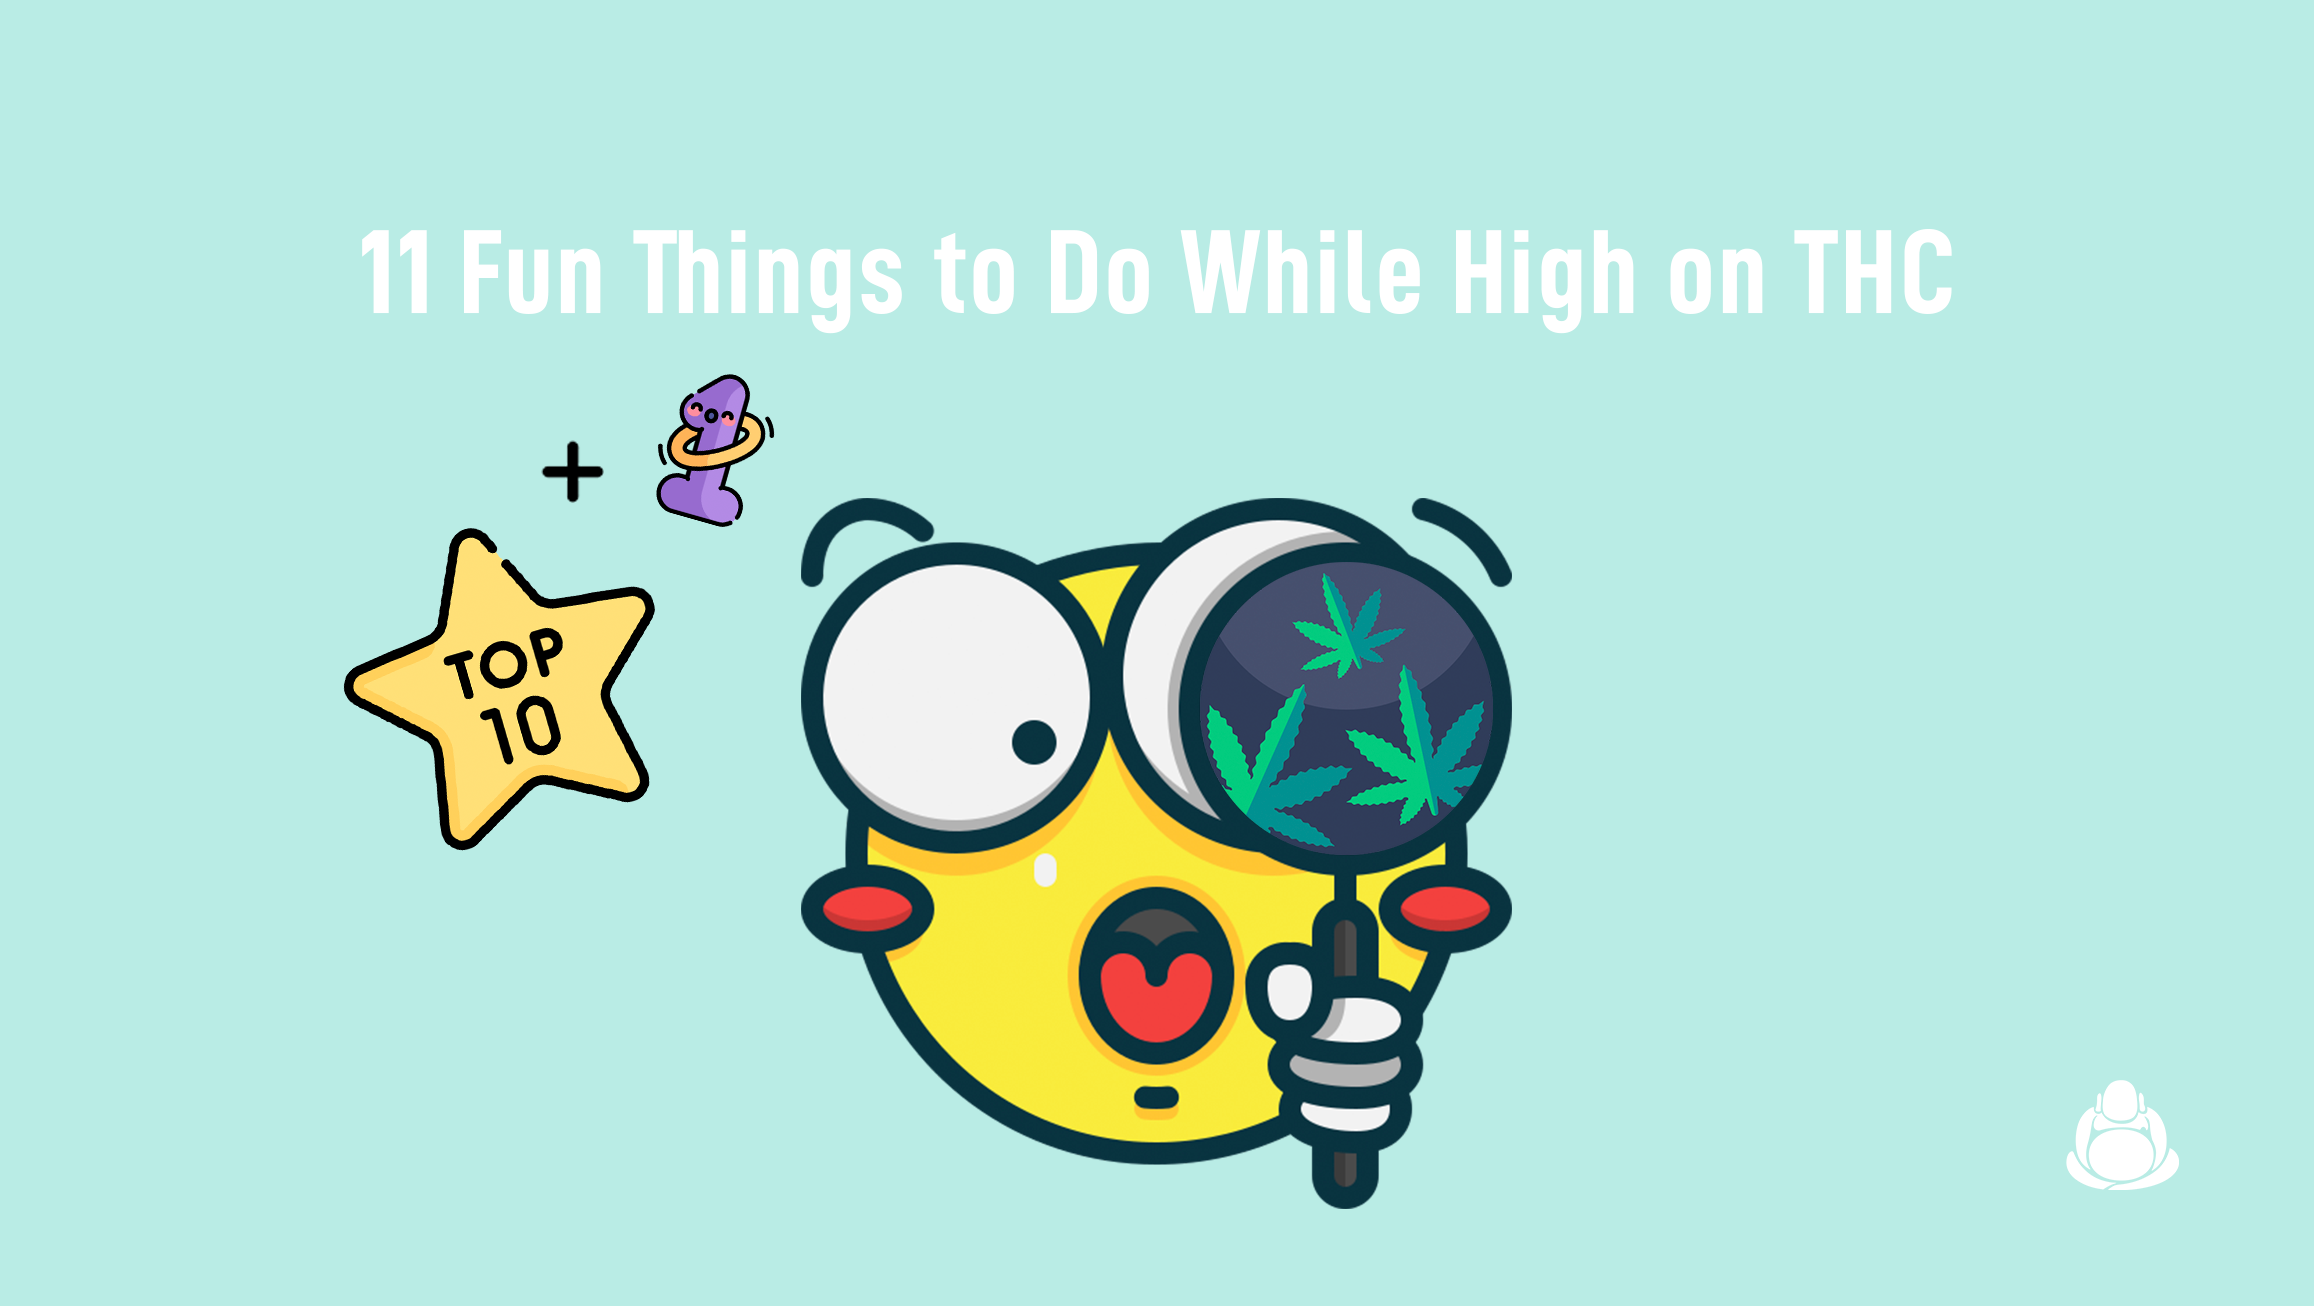 11 Fun Things to Do While High on THC